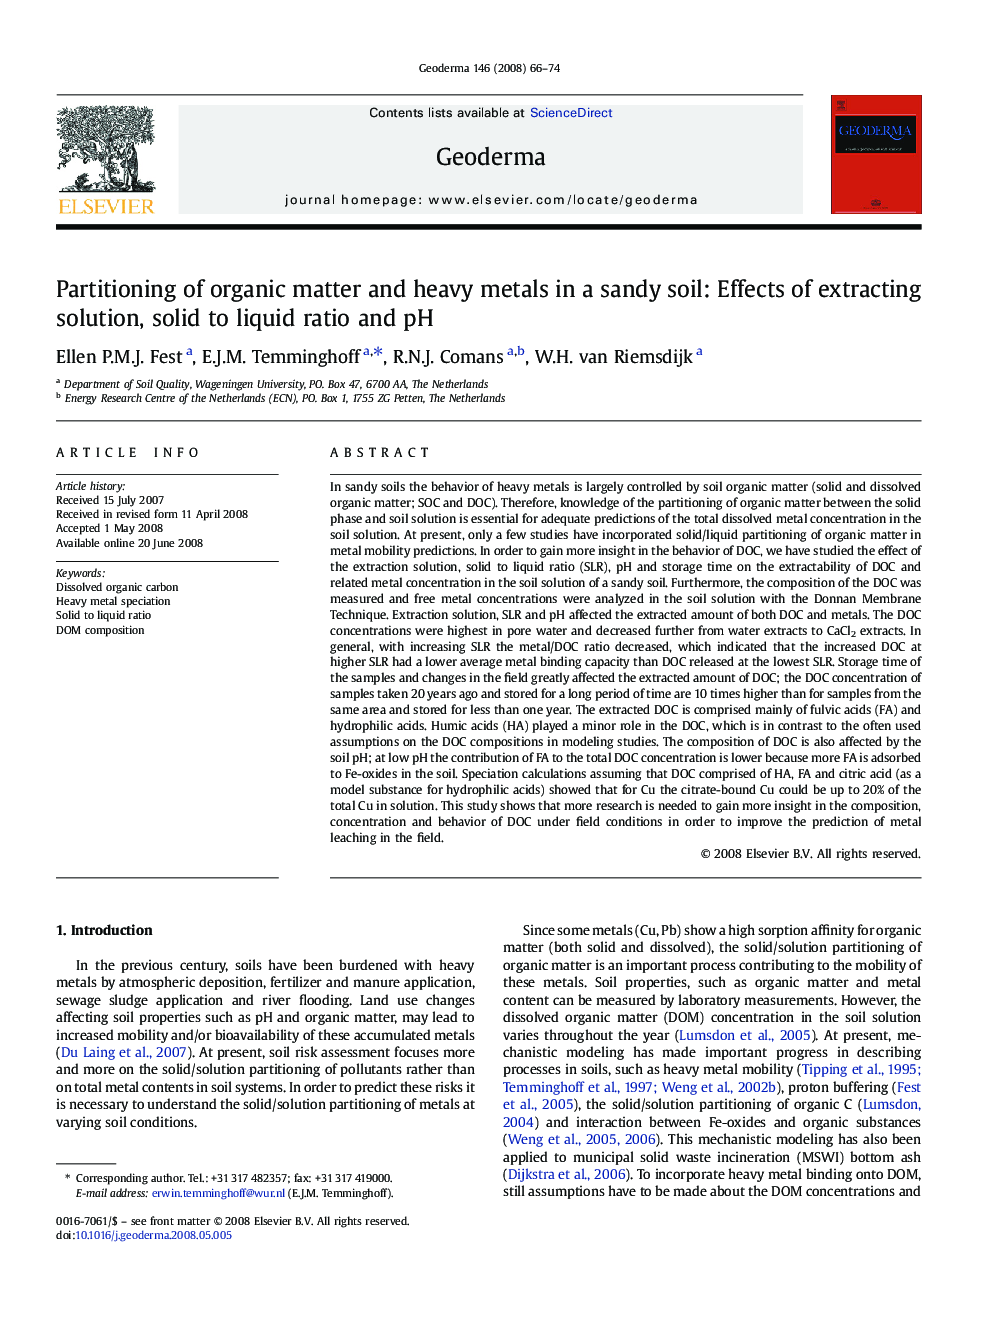 Partitioning of organic matter and heavy metals in a sandy soil: Effects of extracting solution, solid to liquid ratio and pH